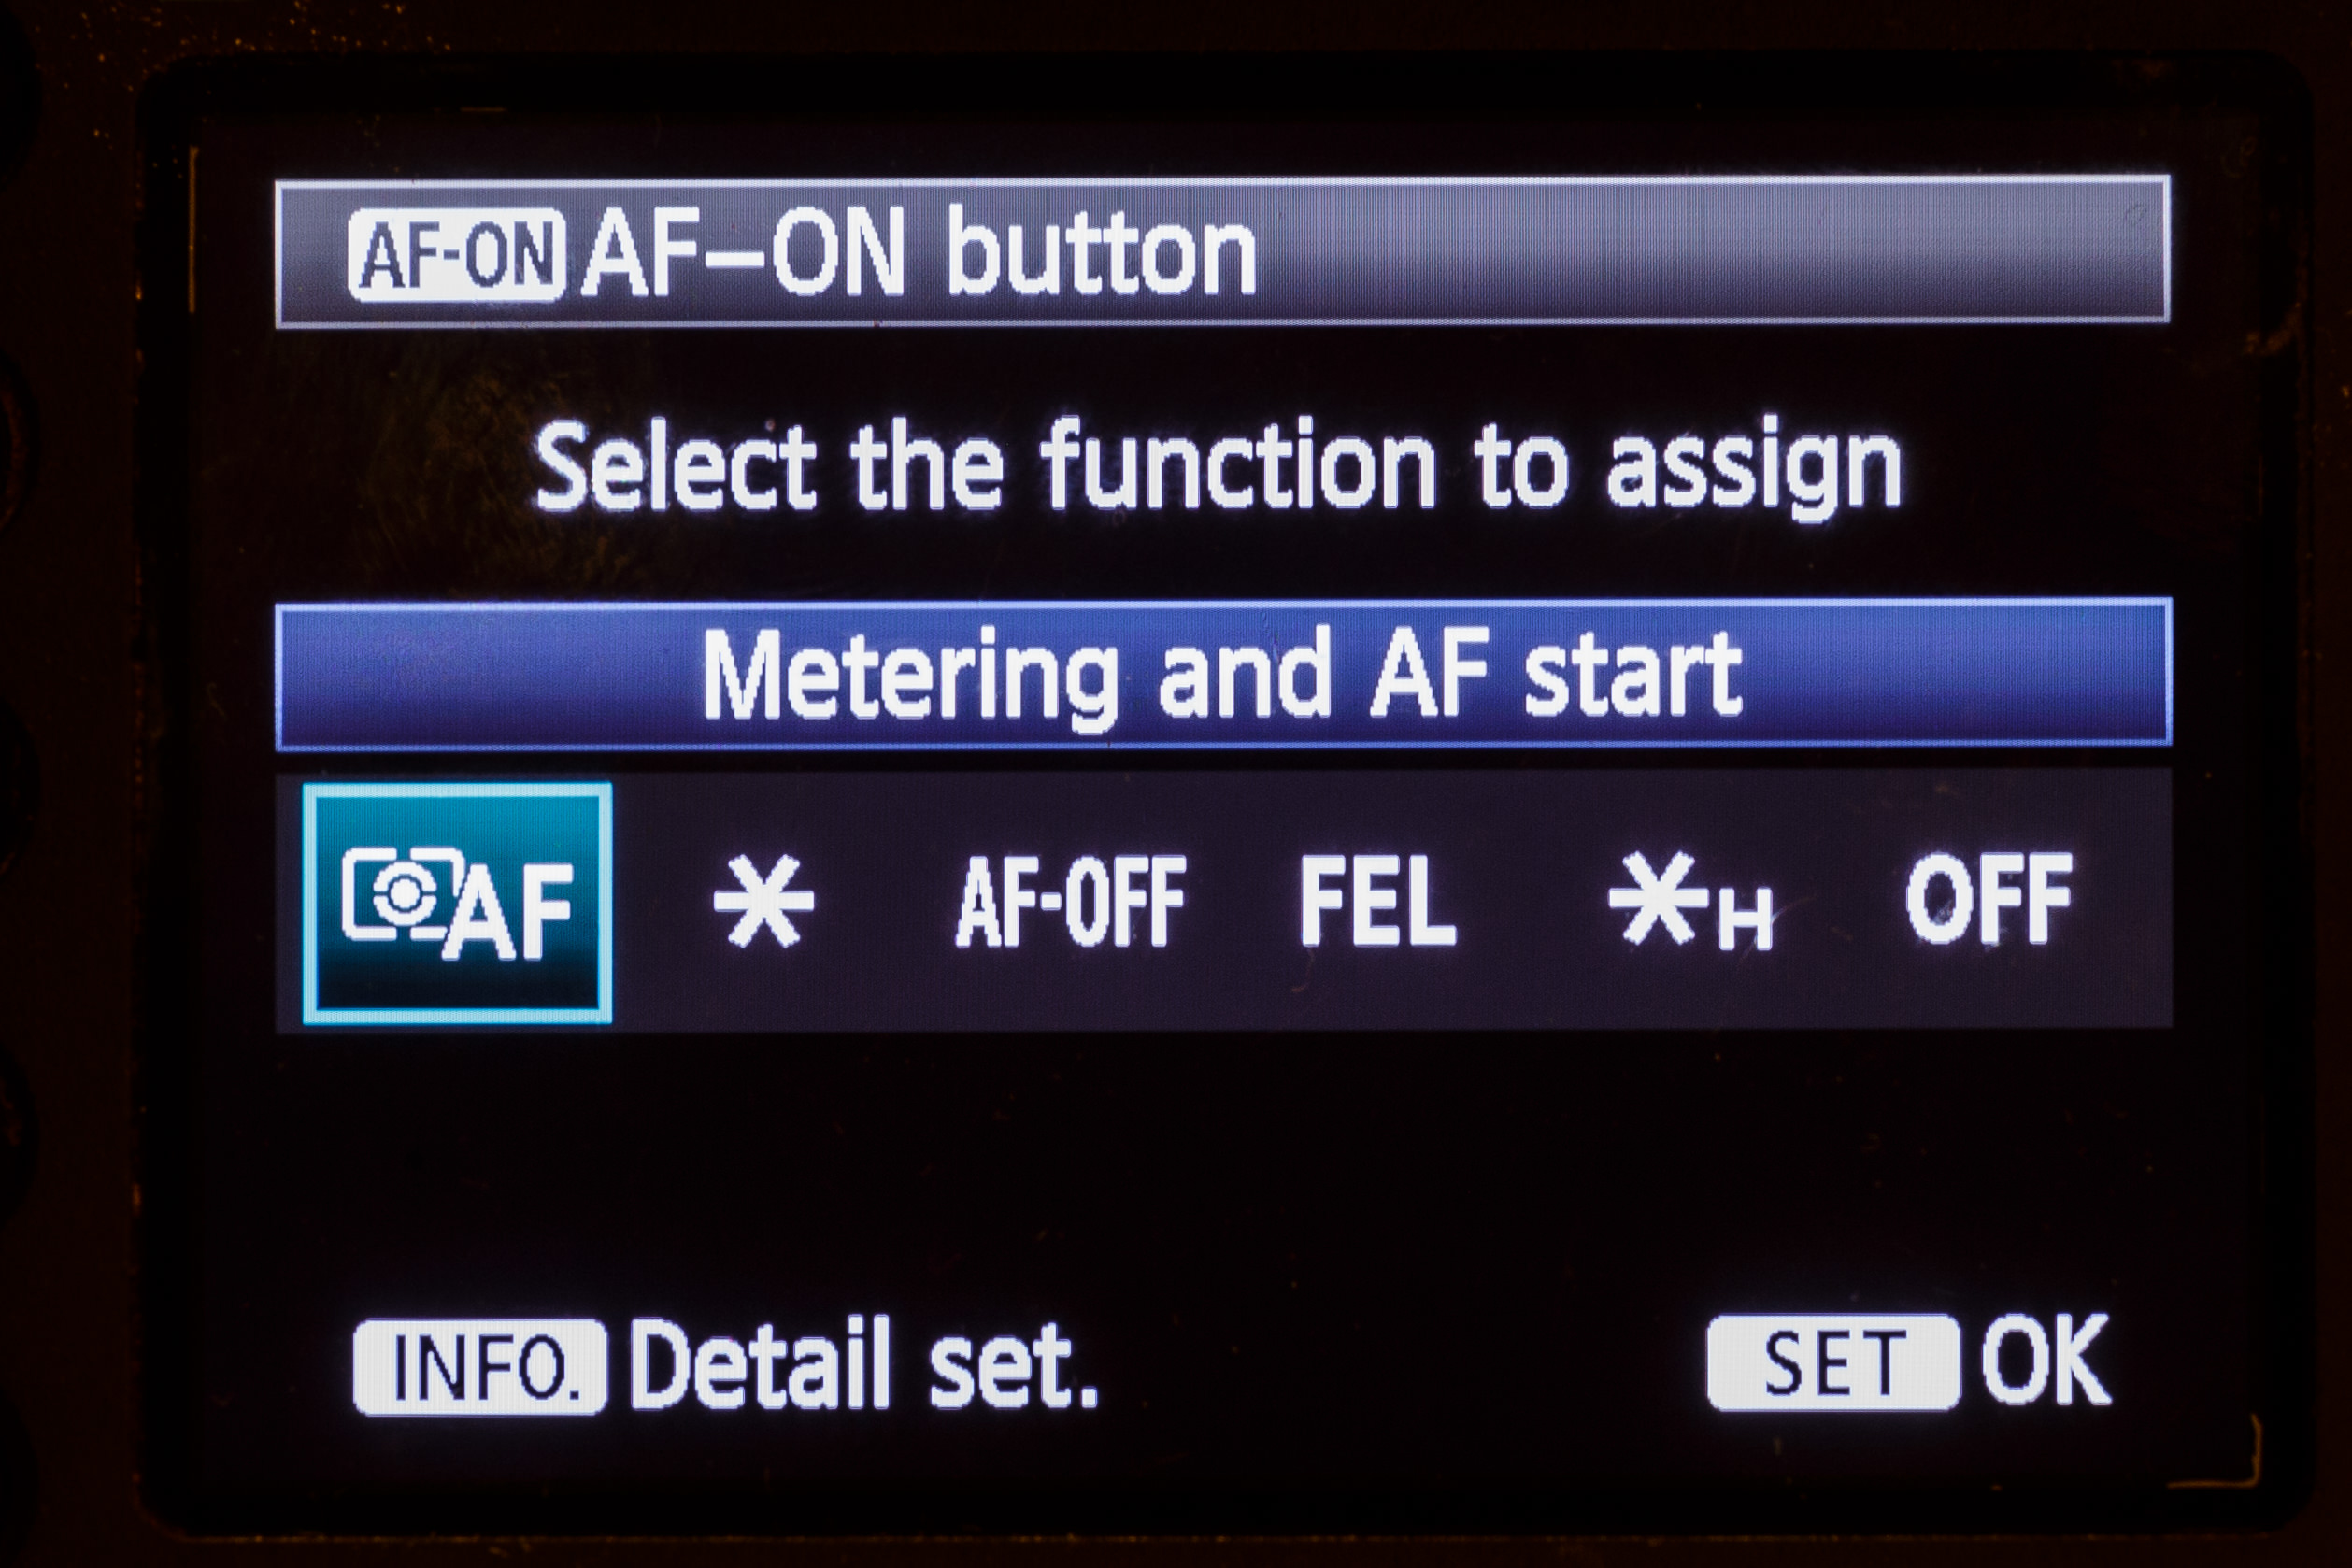 Configuring the AF-ON to focus the lens.